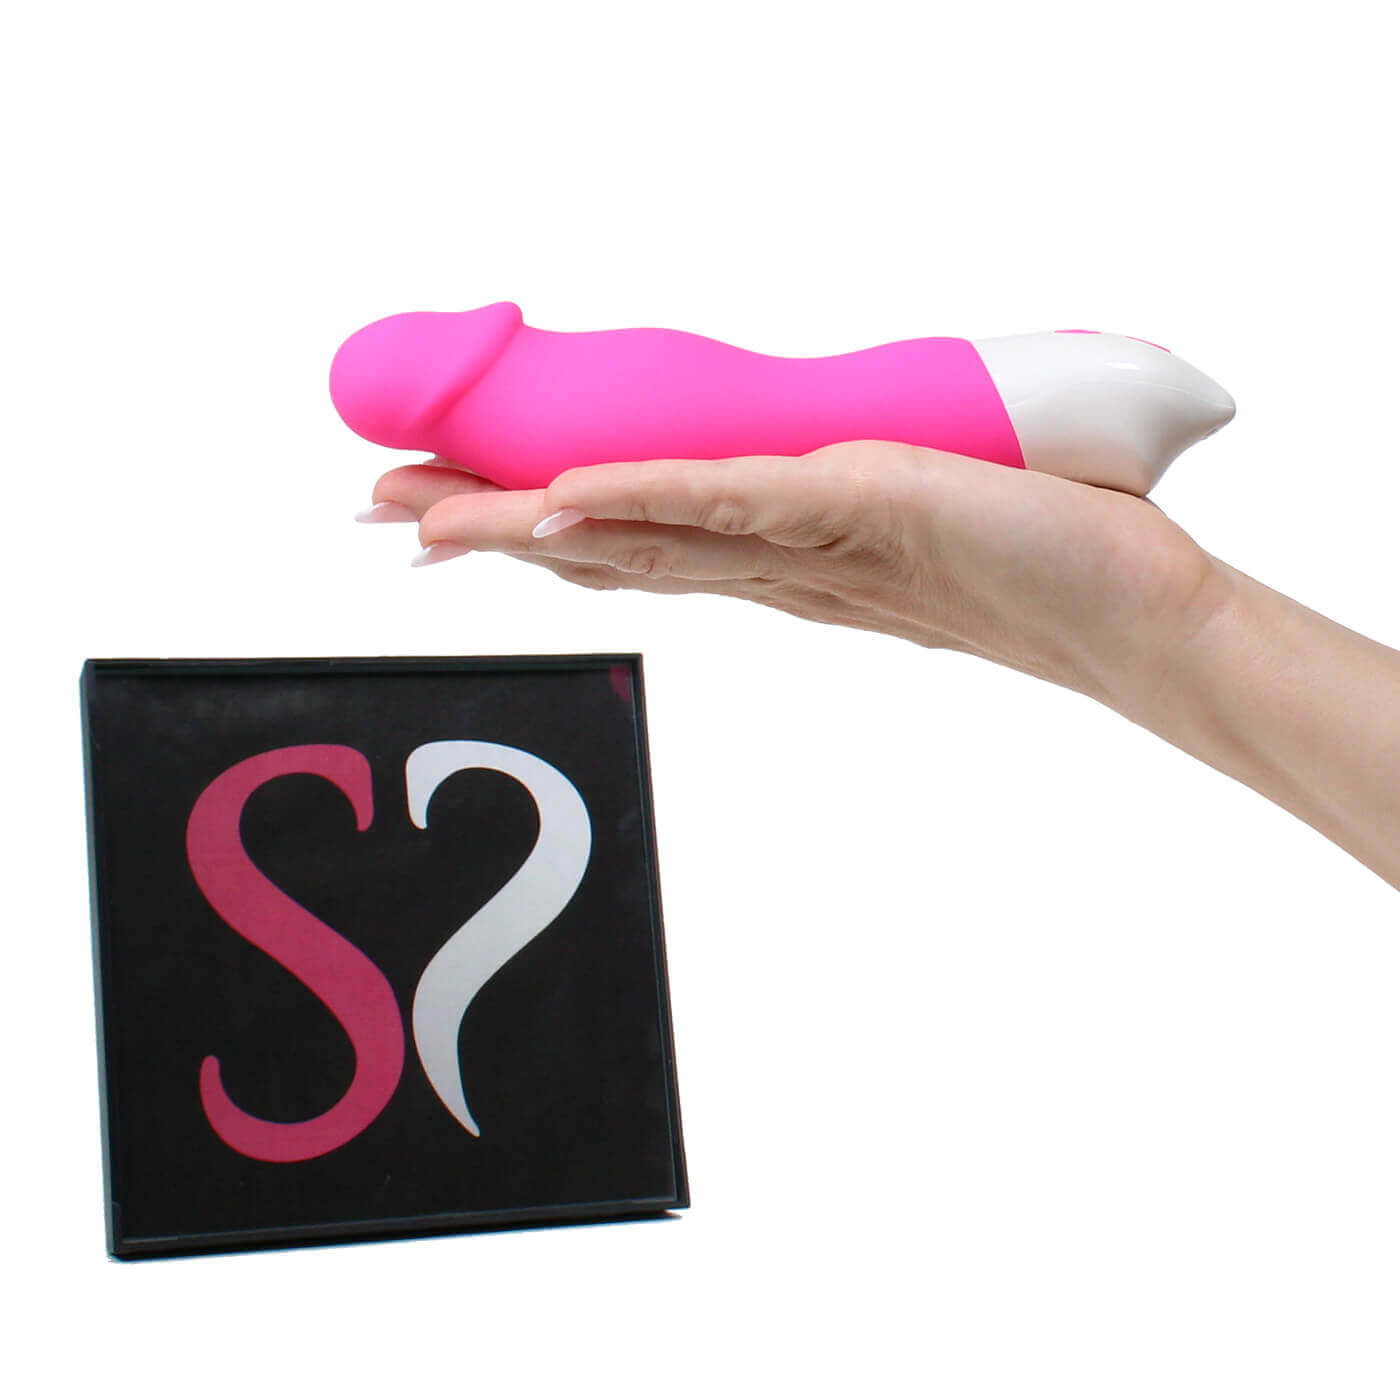 GRAVITATE 7 Function Rechargeable Powerful Tapered Realistic Dildo Vibrator